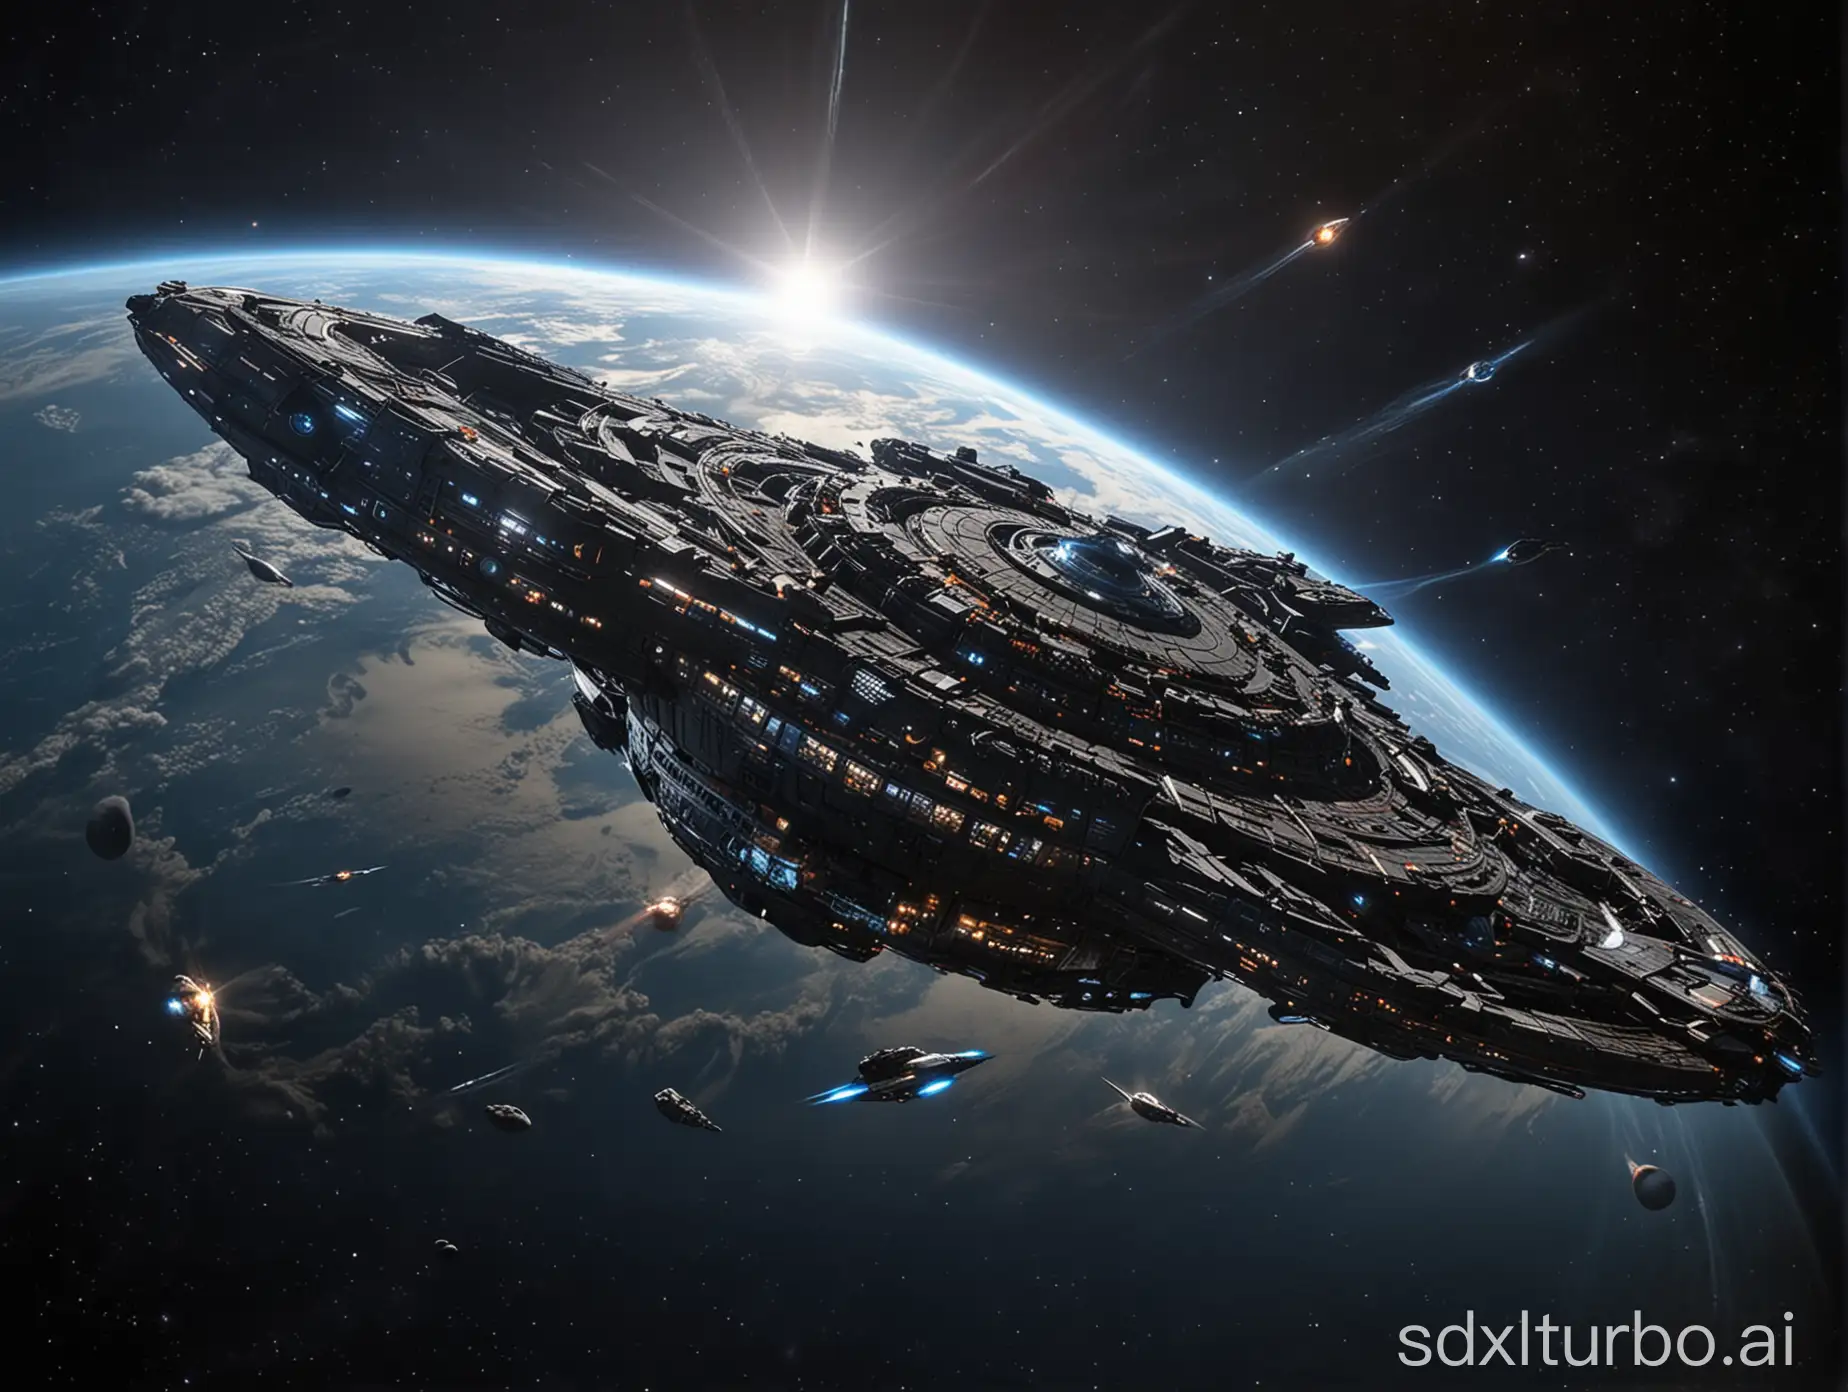 for implementing the reincarnation plan, humans have gathered all the resources and technologies, built a superstar ship named ‘time and space Wanderer’. In this process, humans must overcome technological difficulties, including precise calculation of black hole parameters, spaceship design, and energy supply etc.